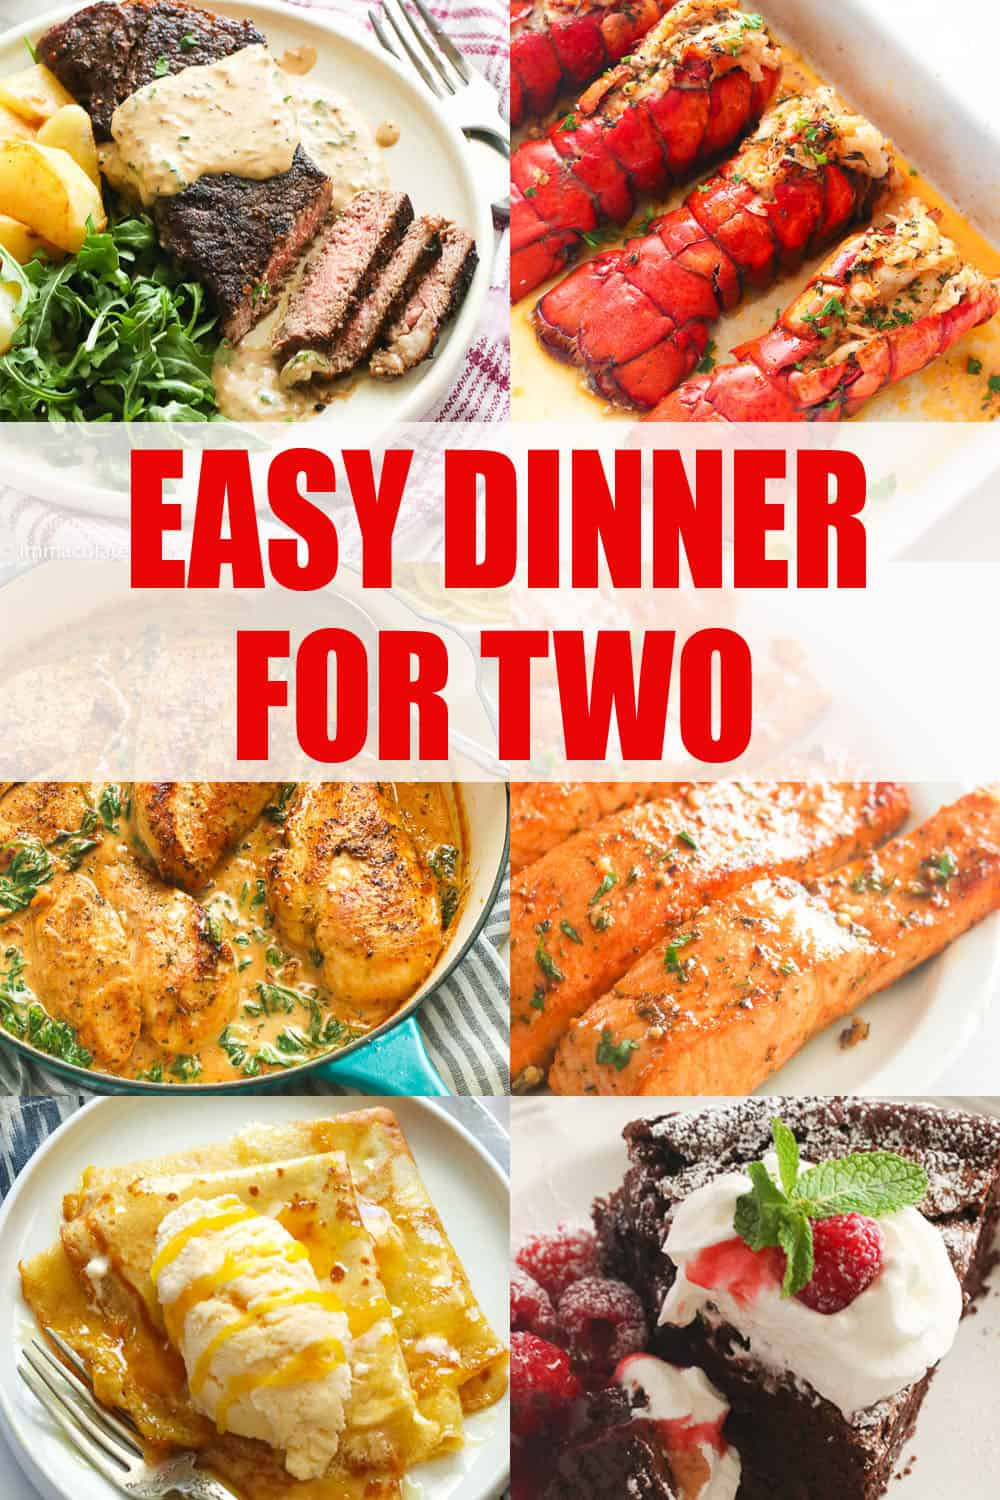 15 Great Cheap Easy Dinners for Two